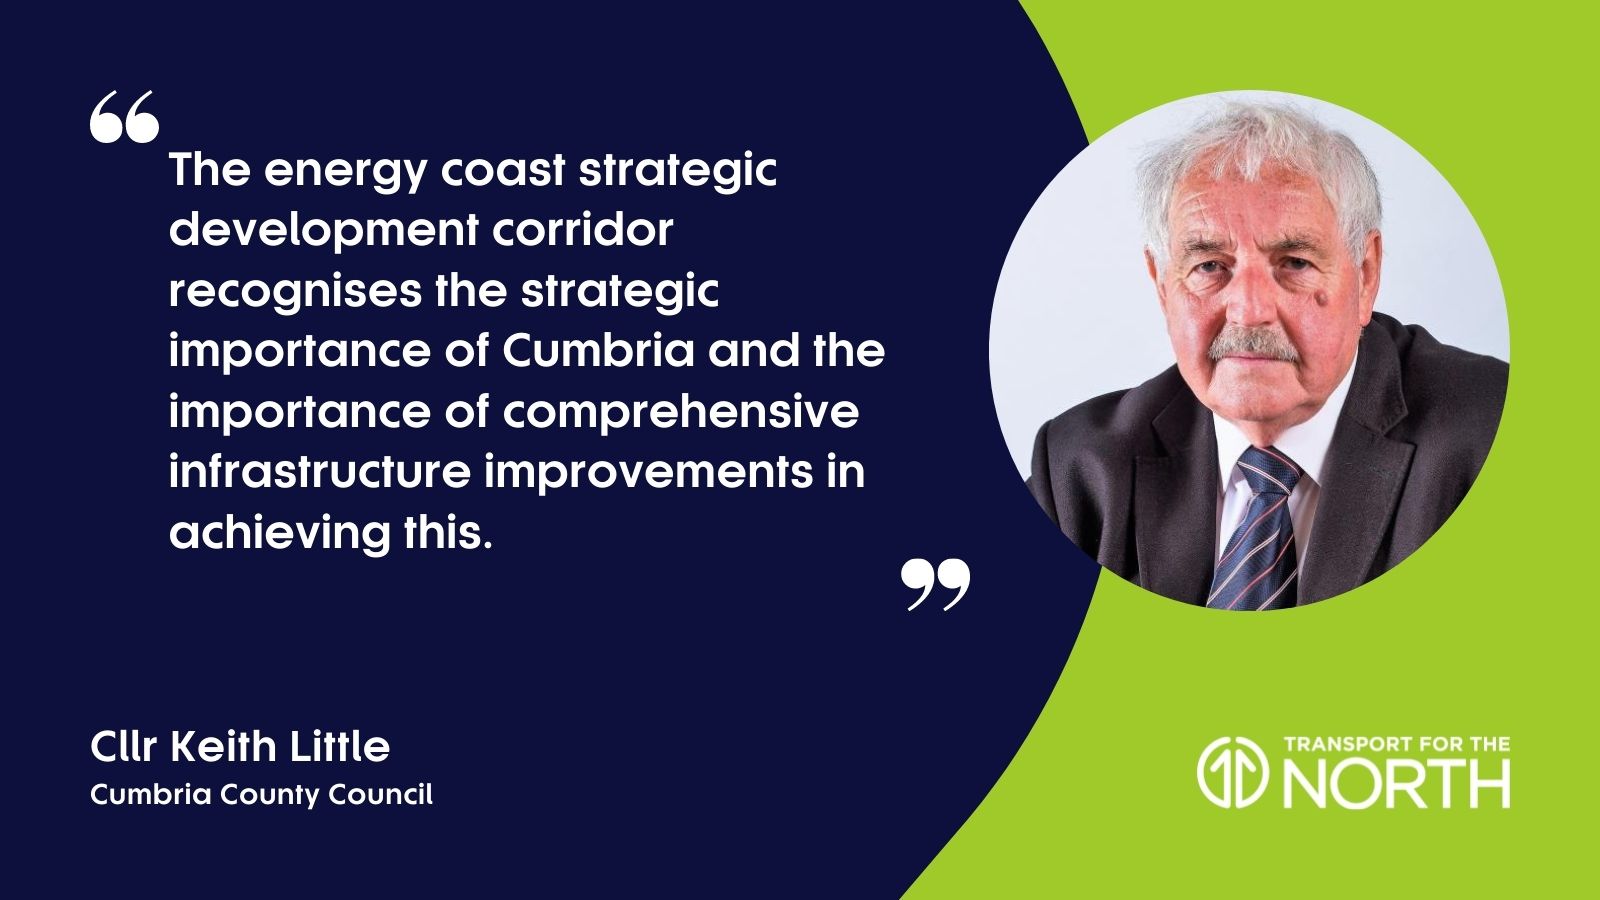 Cllr Keith Little comment on Connecting the Energy Coasts